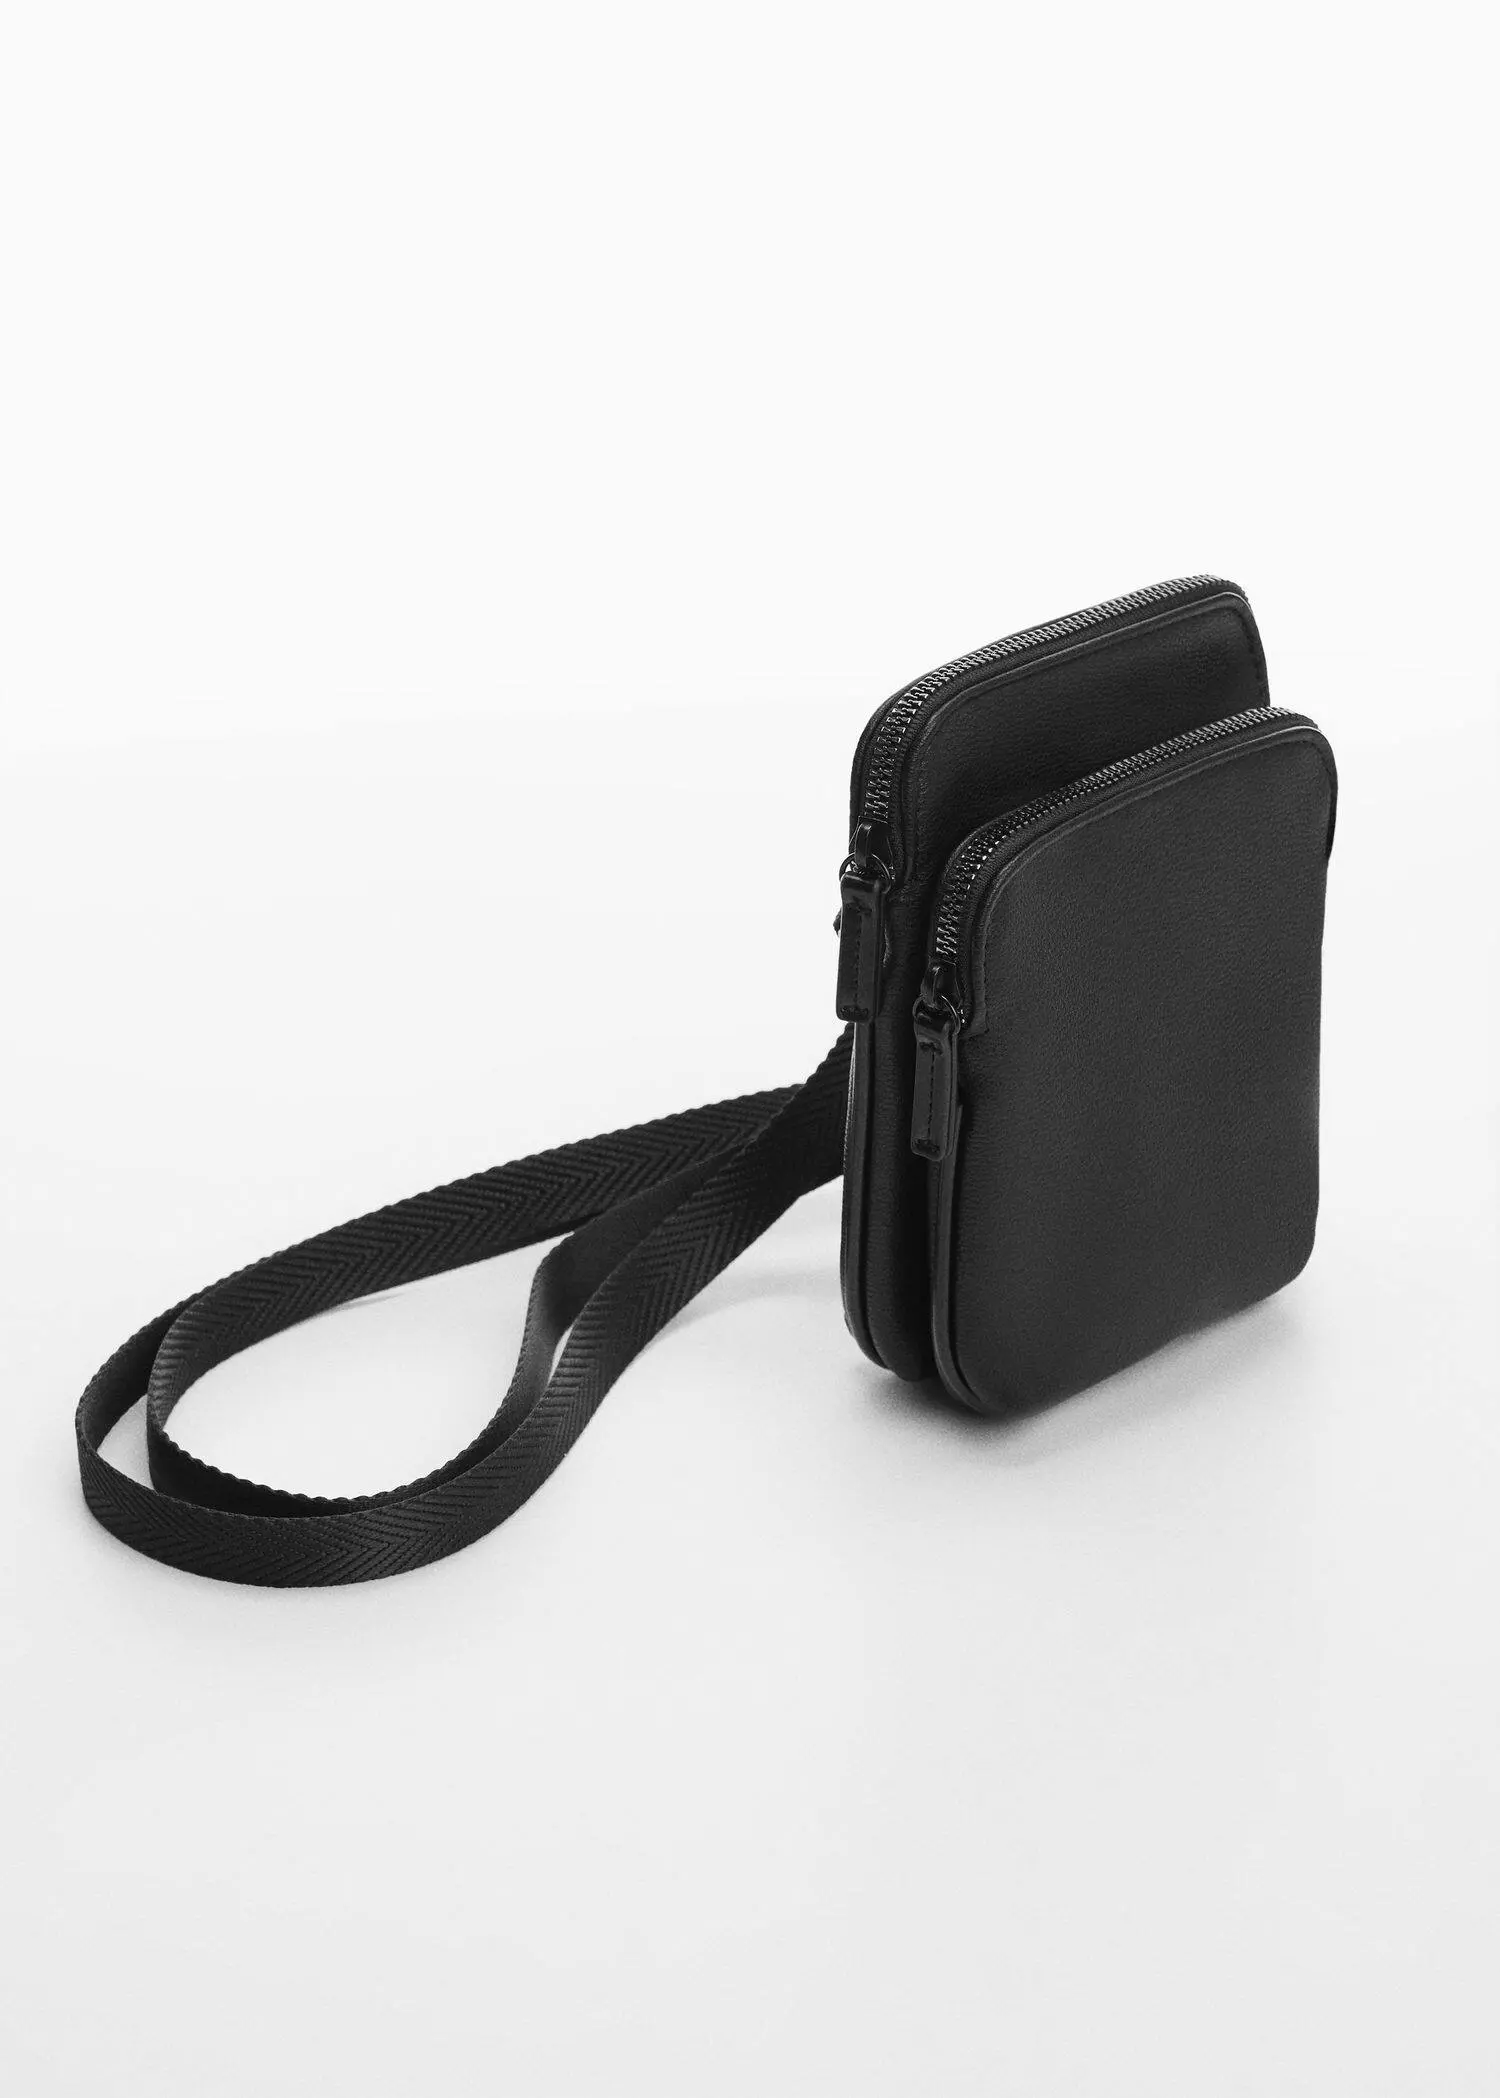 Mango Mini leather-effect shoulder bag. a black purse is sitting on the ground. 